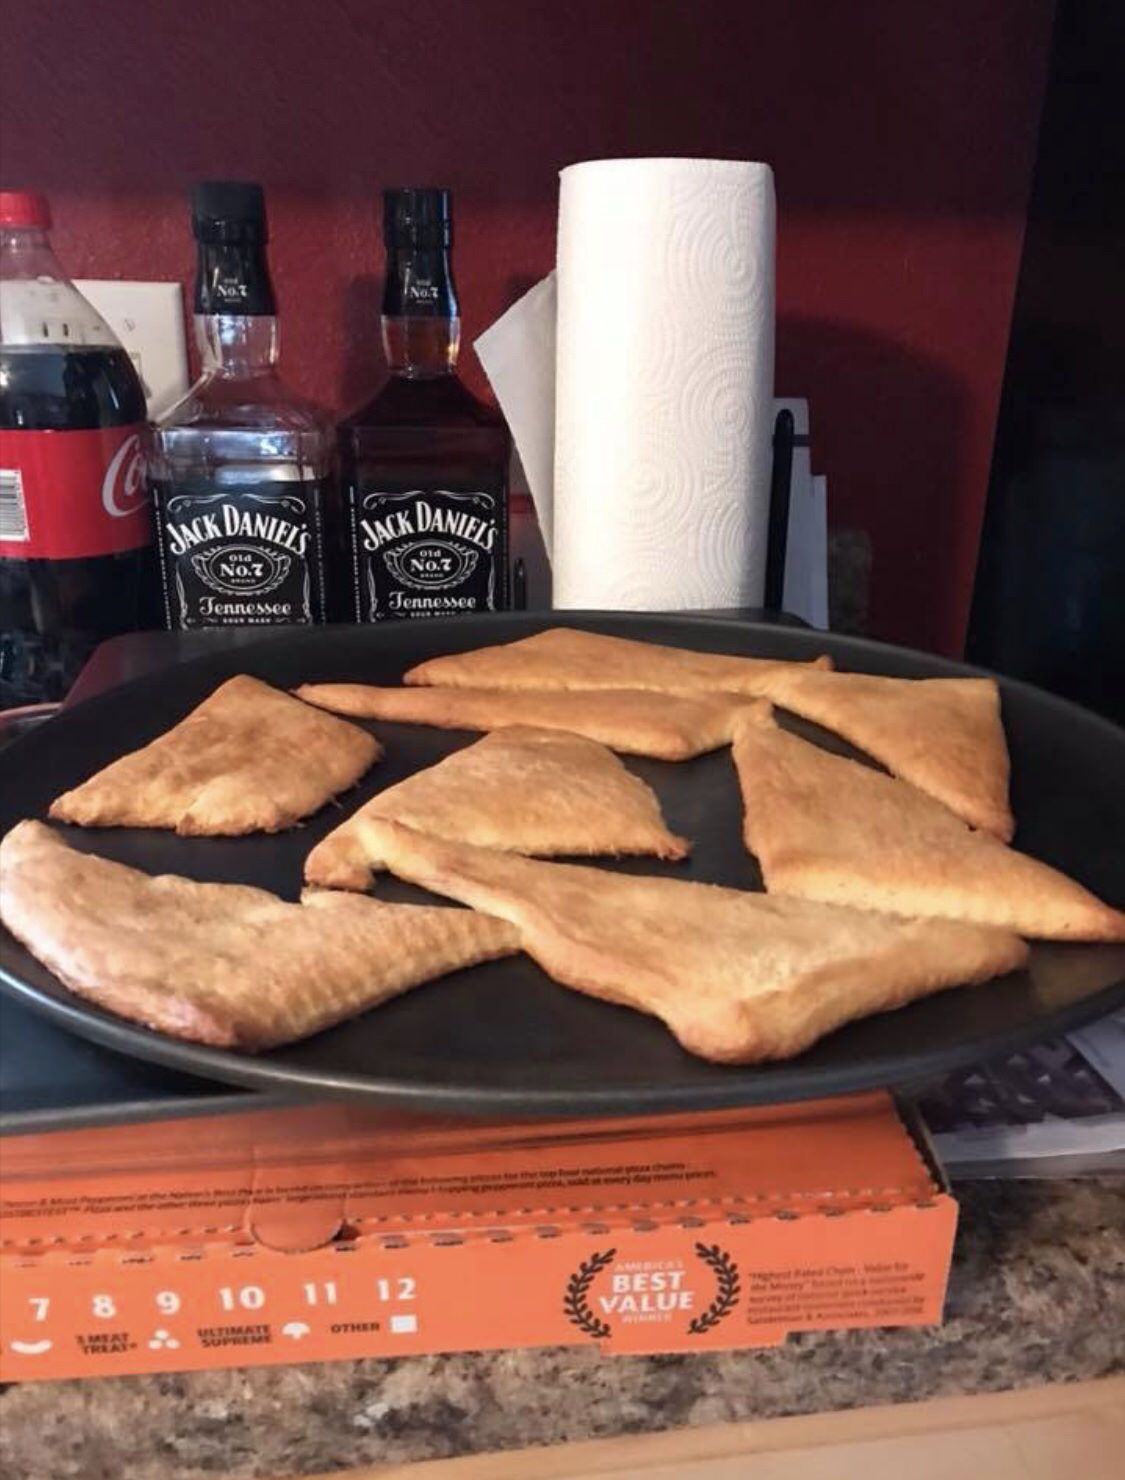 My friends mother thought that the croissants would just roll themselves up while cooking...